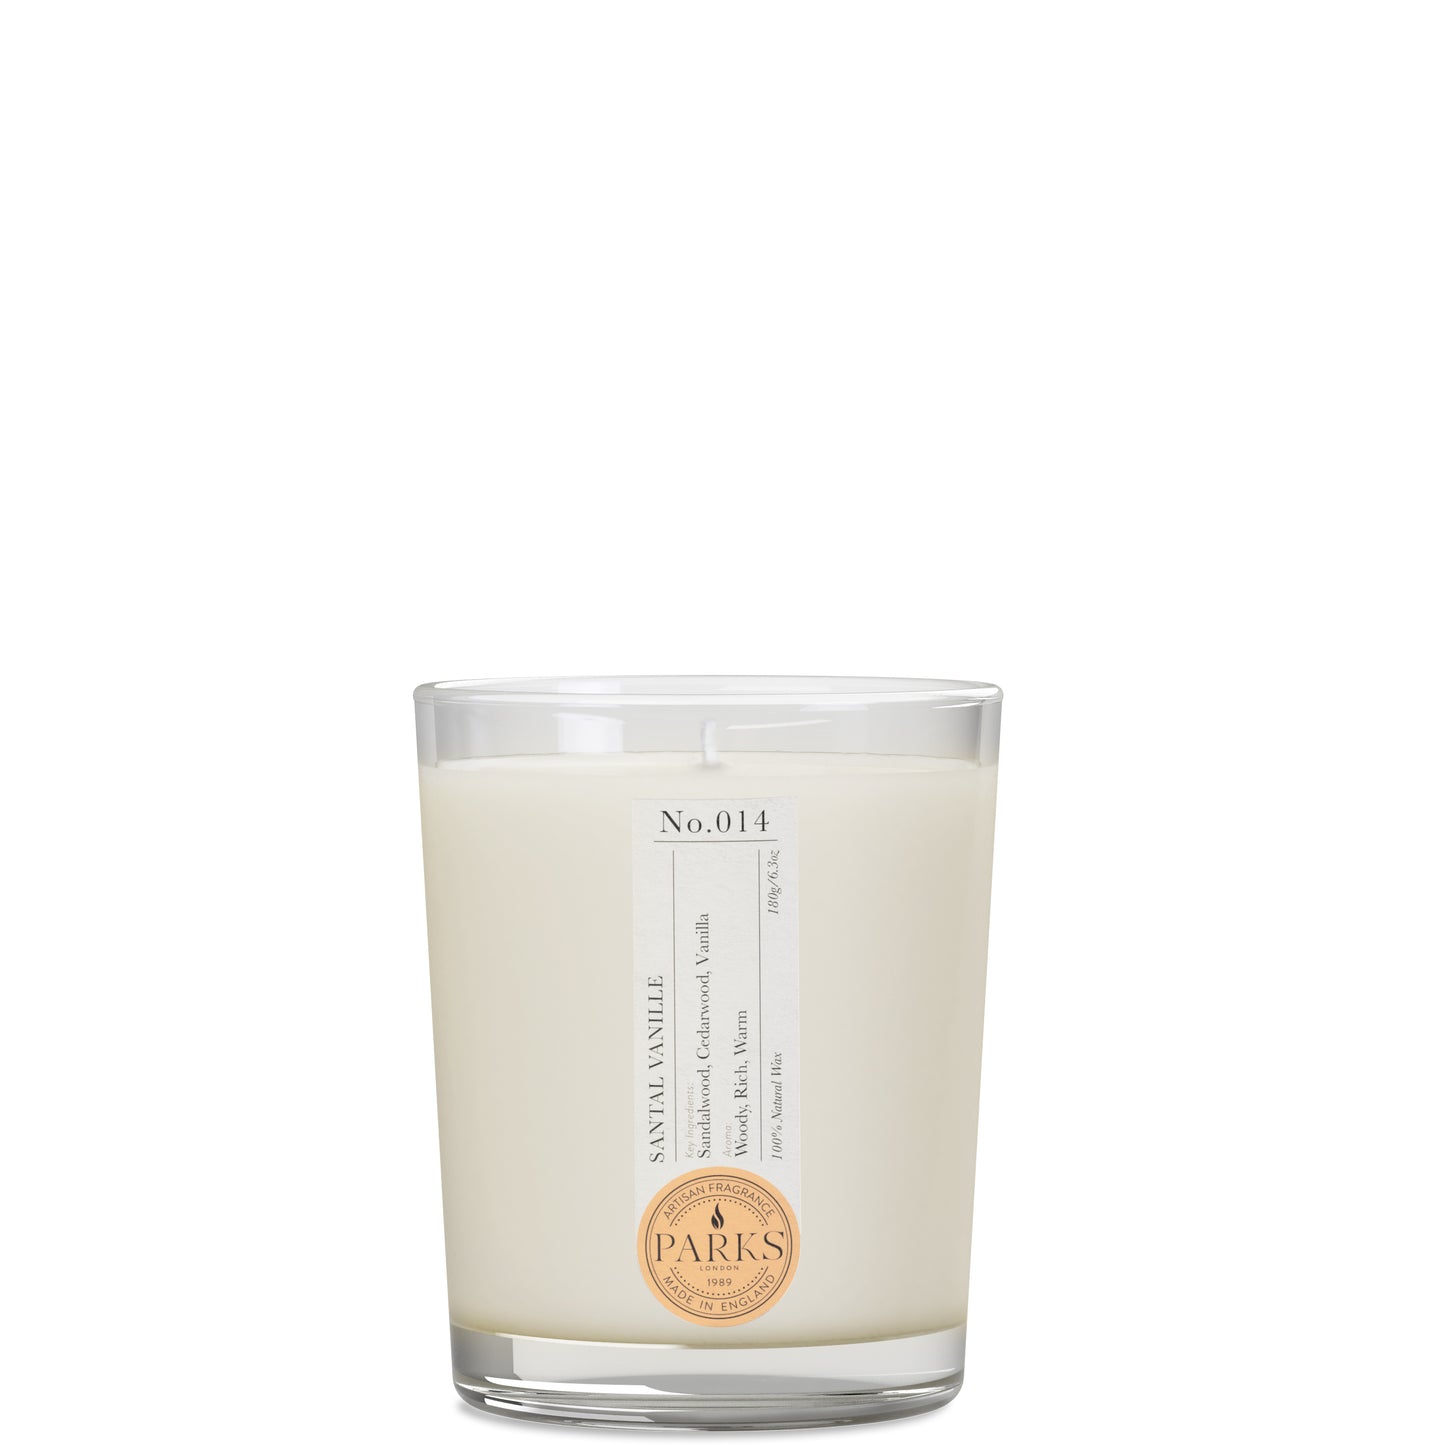 Parks London Home Collection Santal Vanille Candle 180g